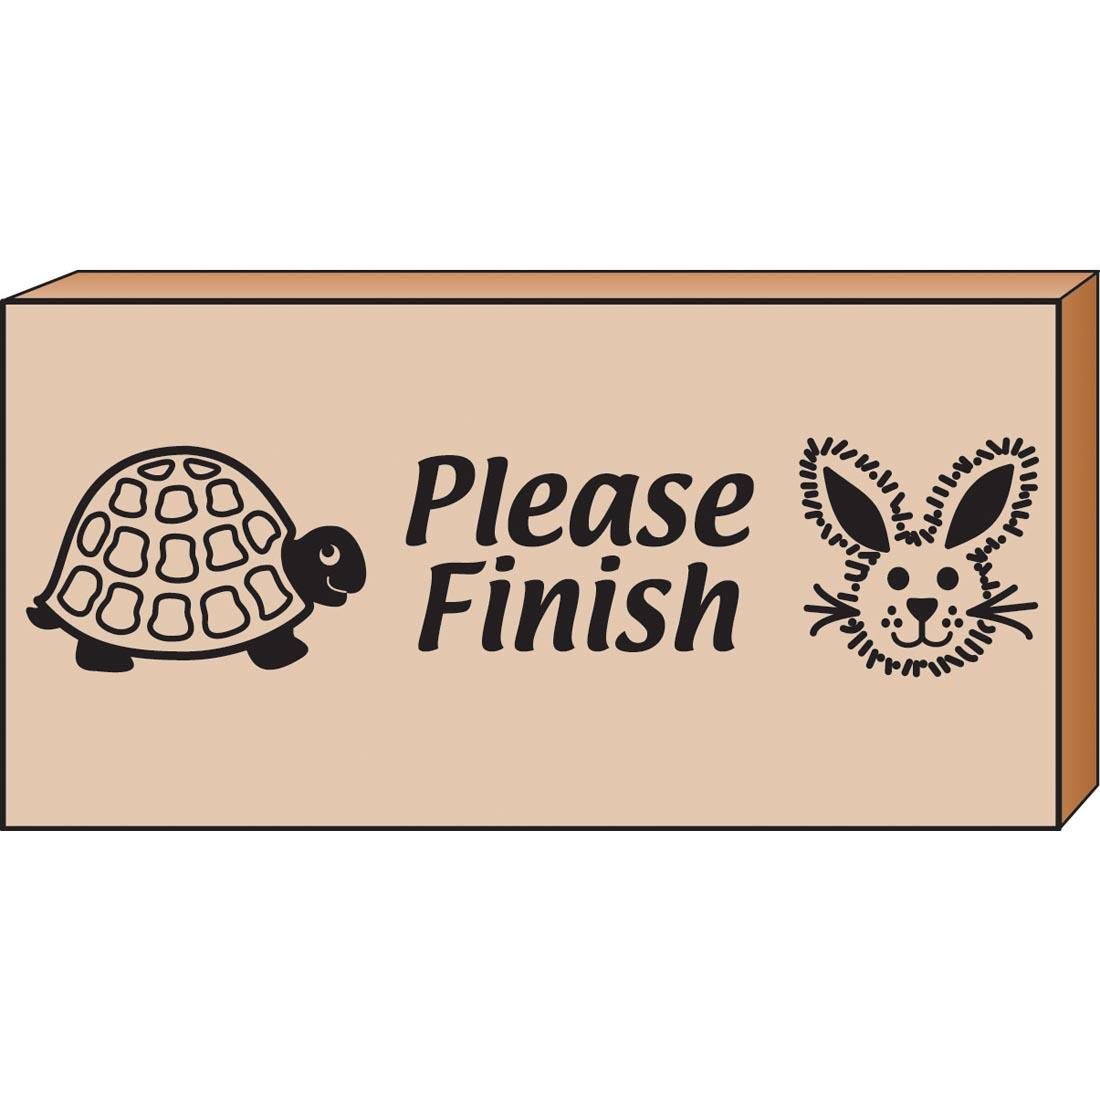 Please Finish Stamp with tortoise and hare